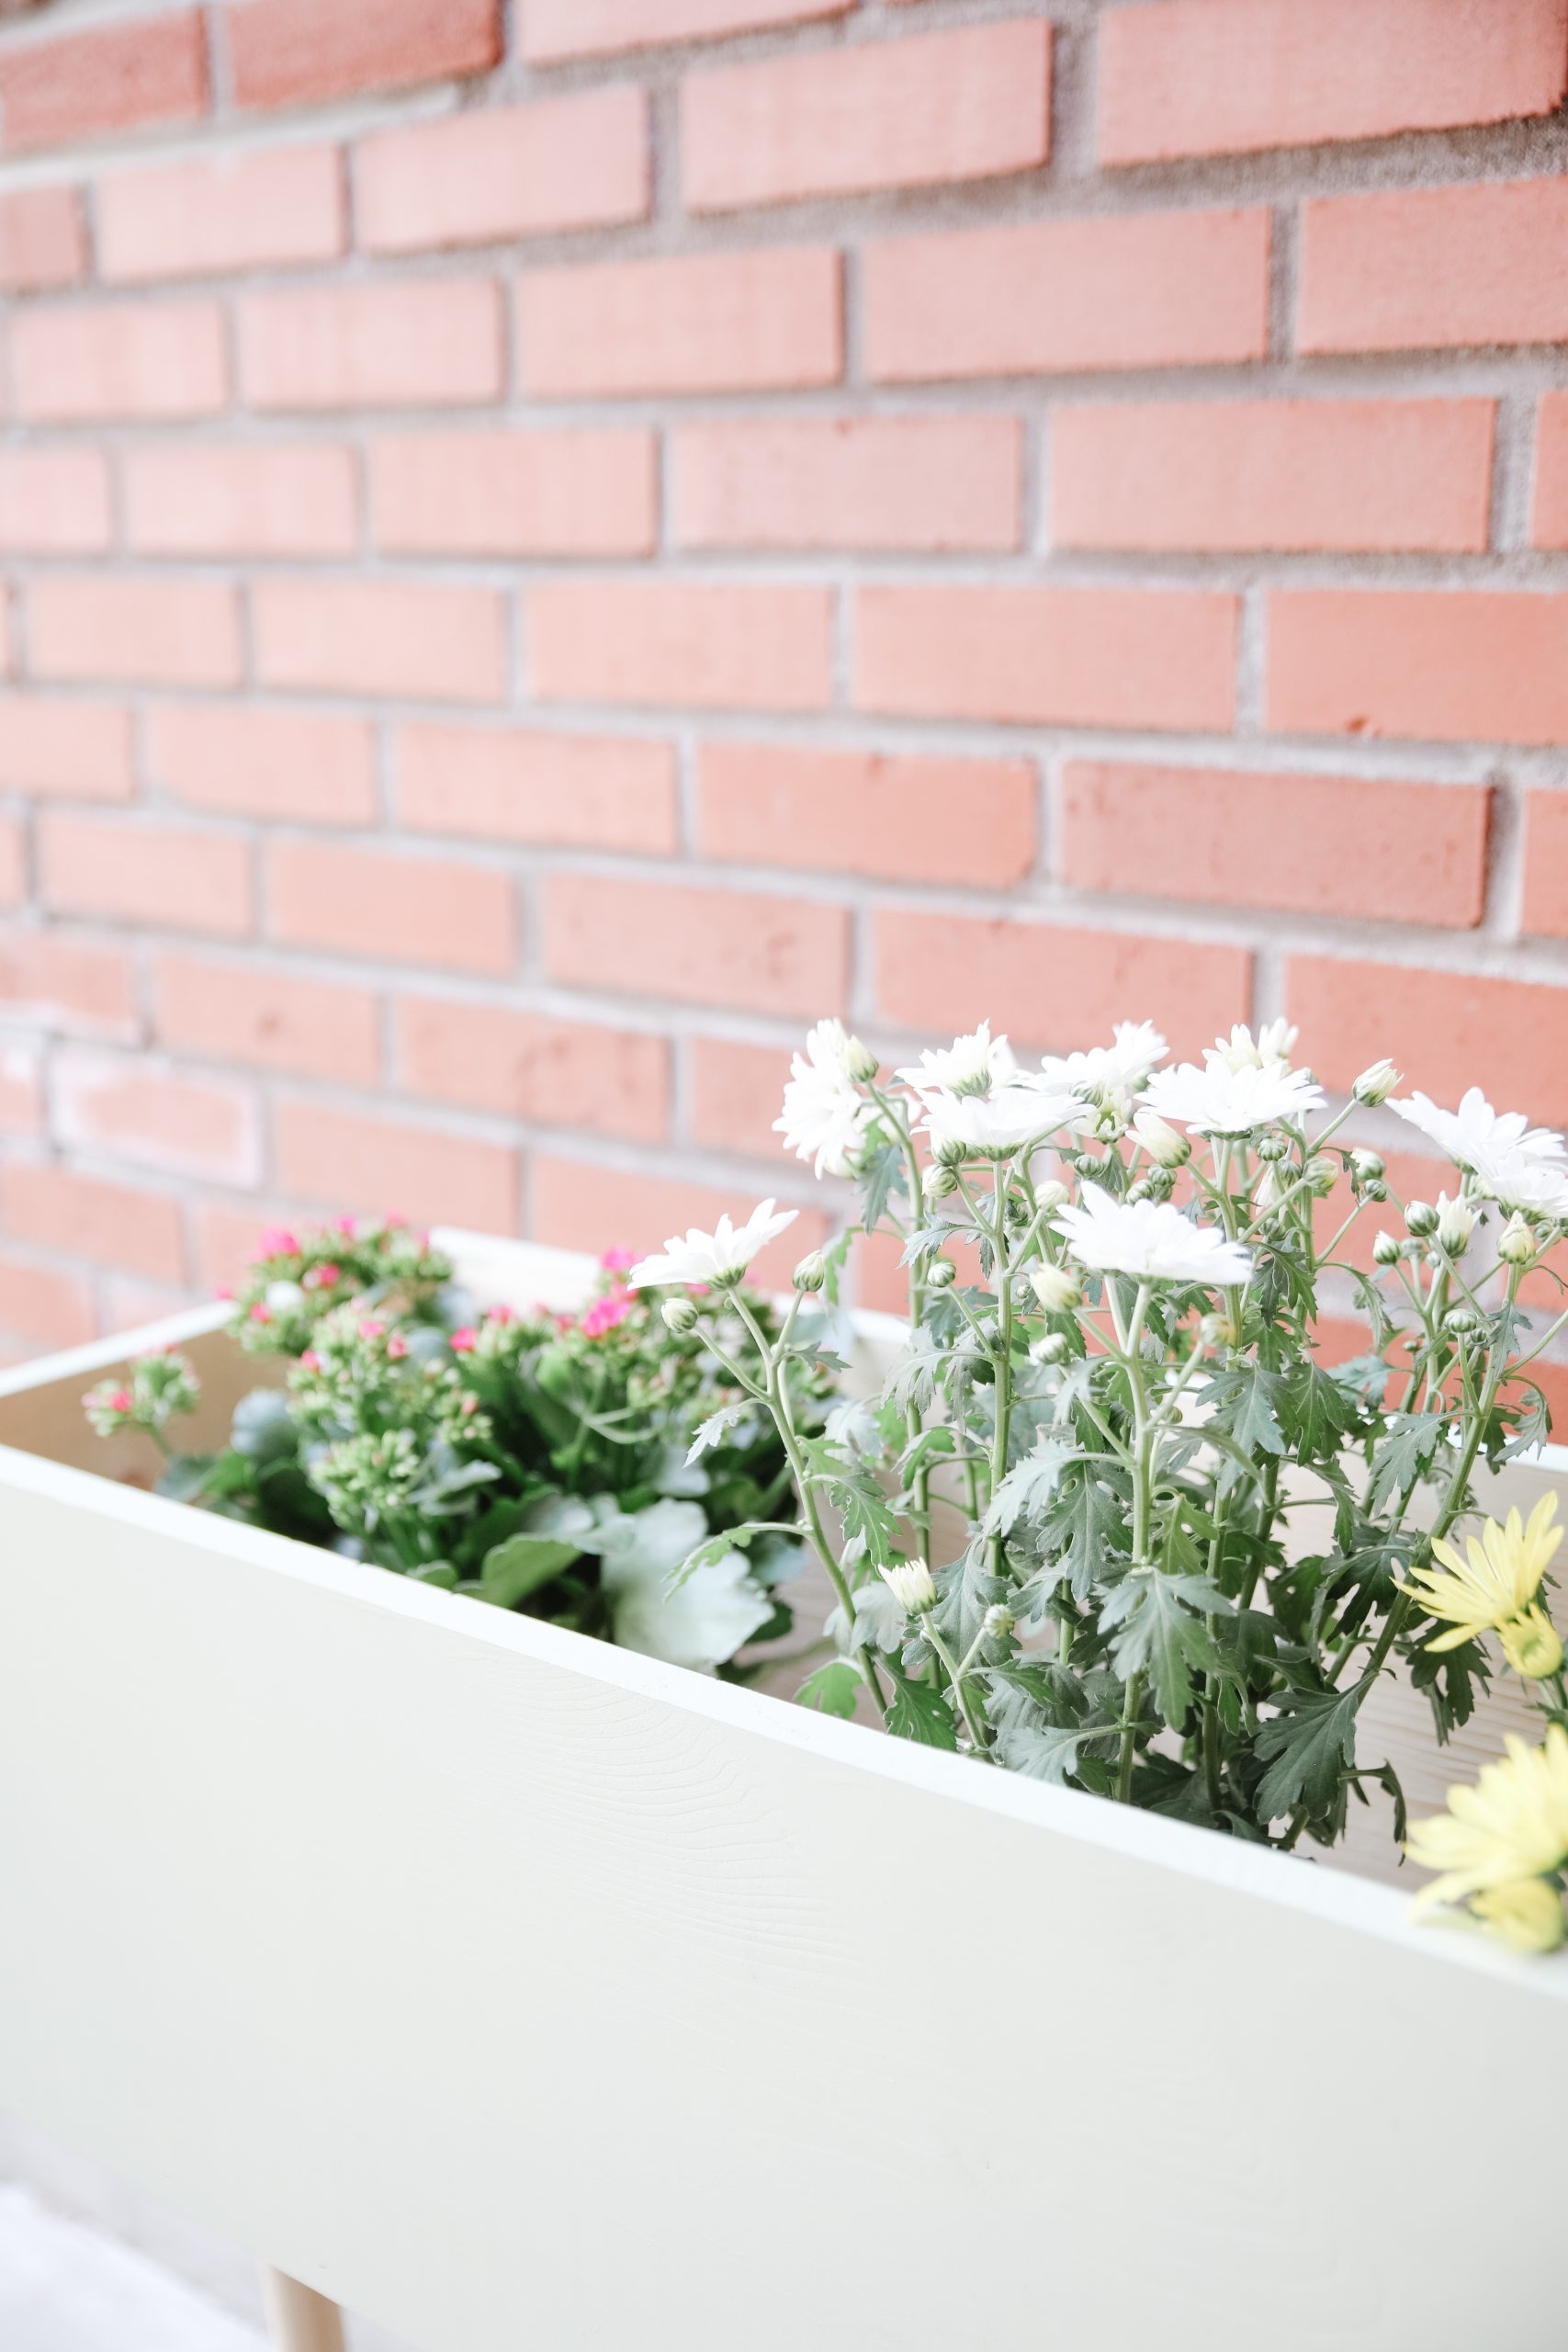 DIY planter box full of flowers, standing against a brick wall backdrop.